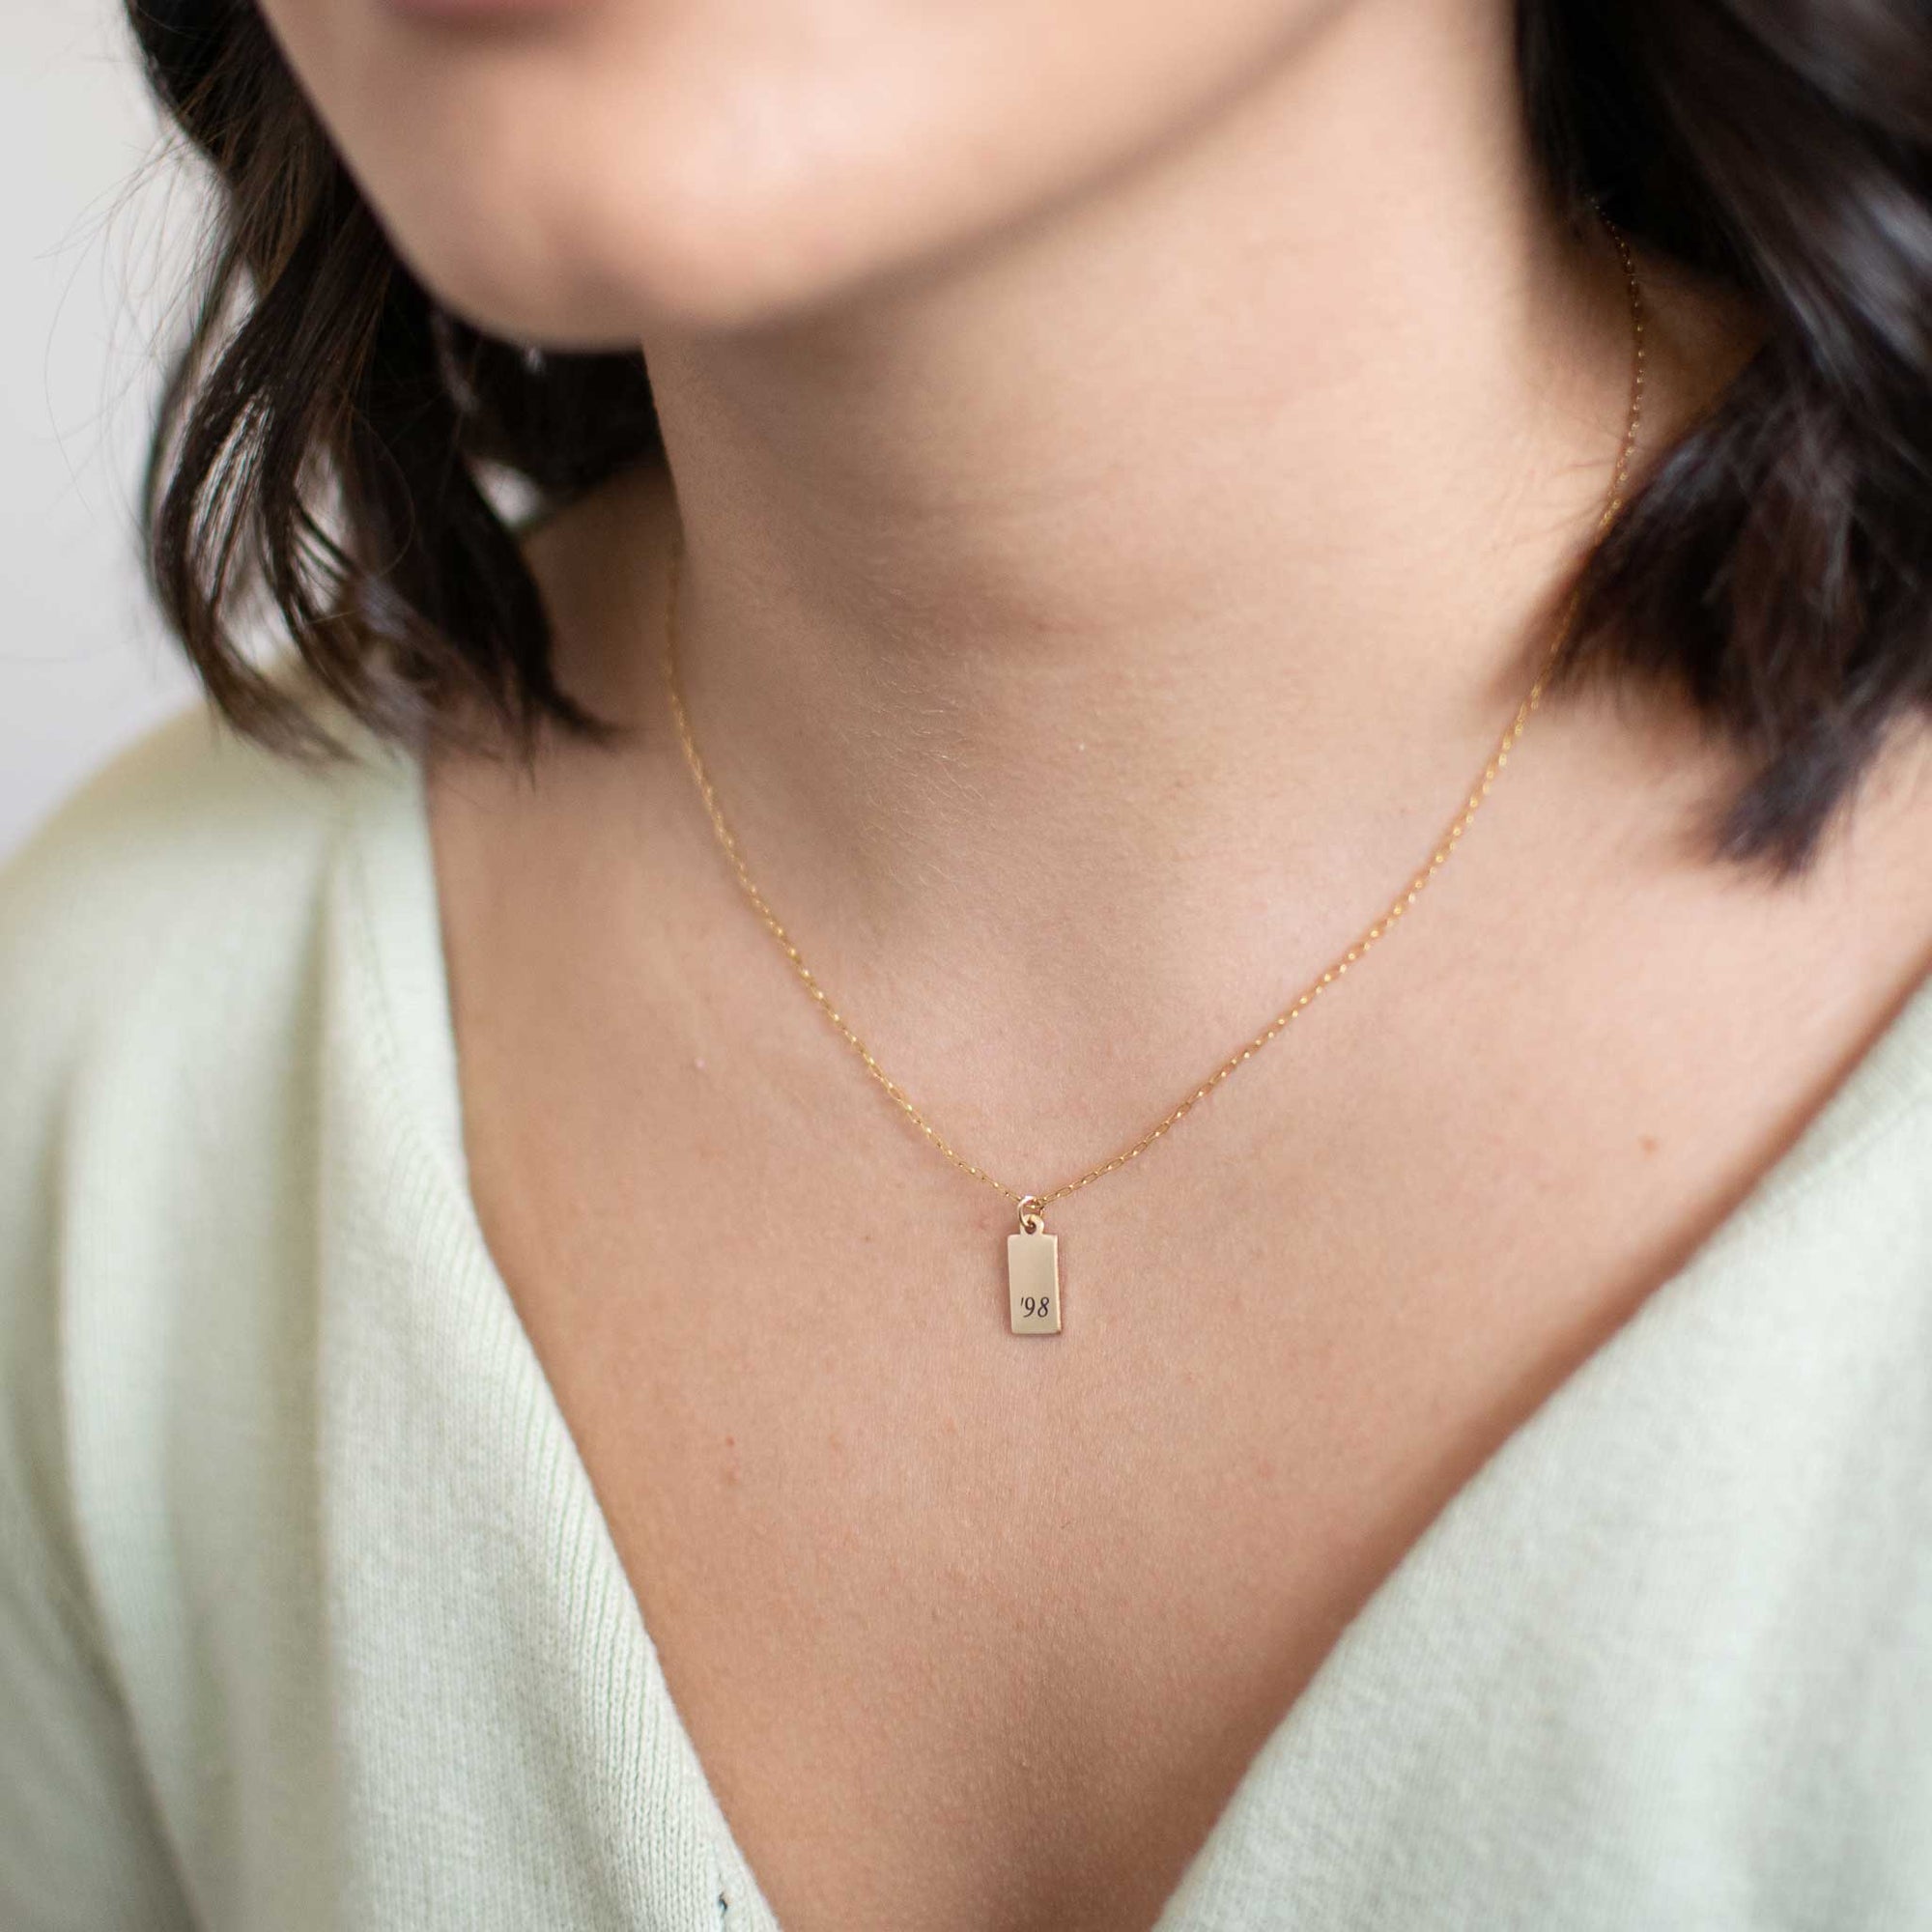 A close up of the tag necklace with '98 engraved horizontally.